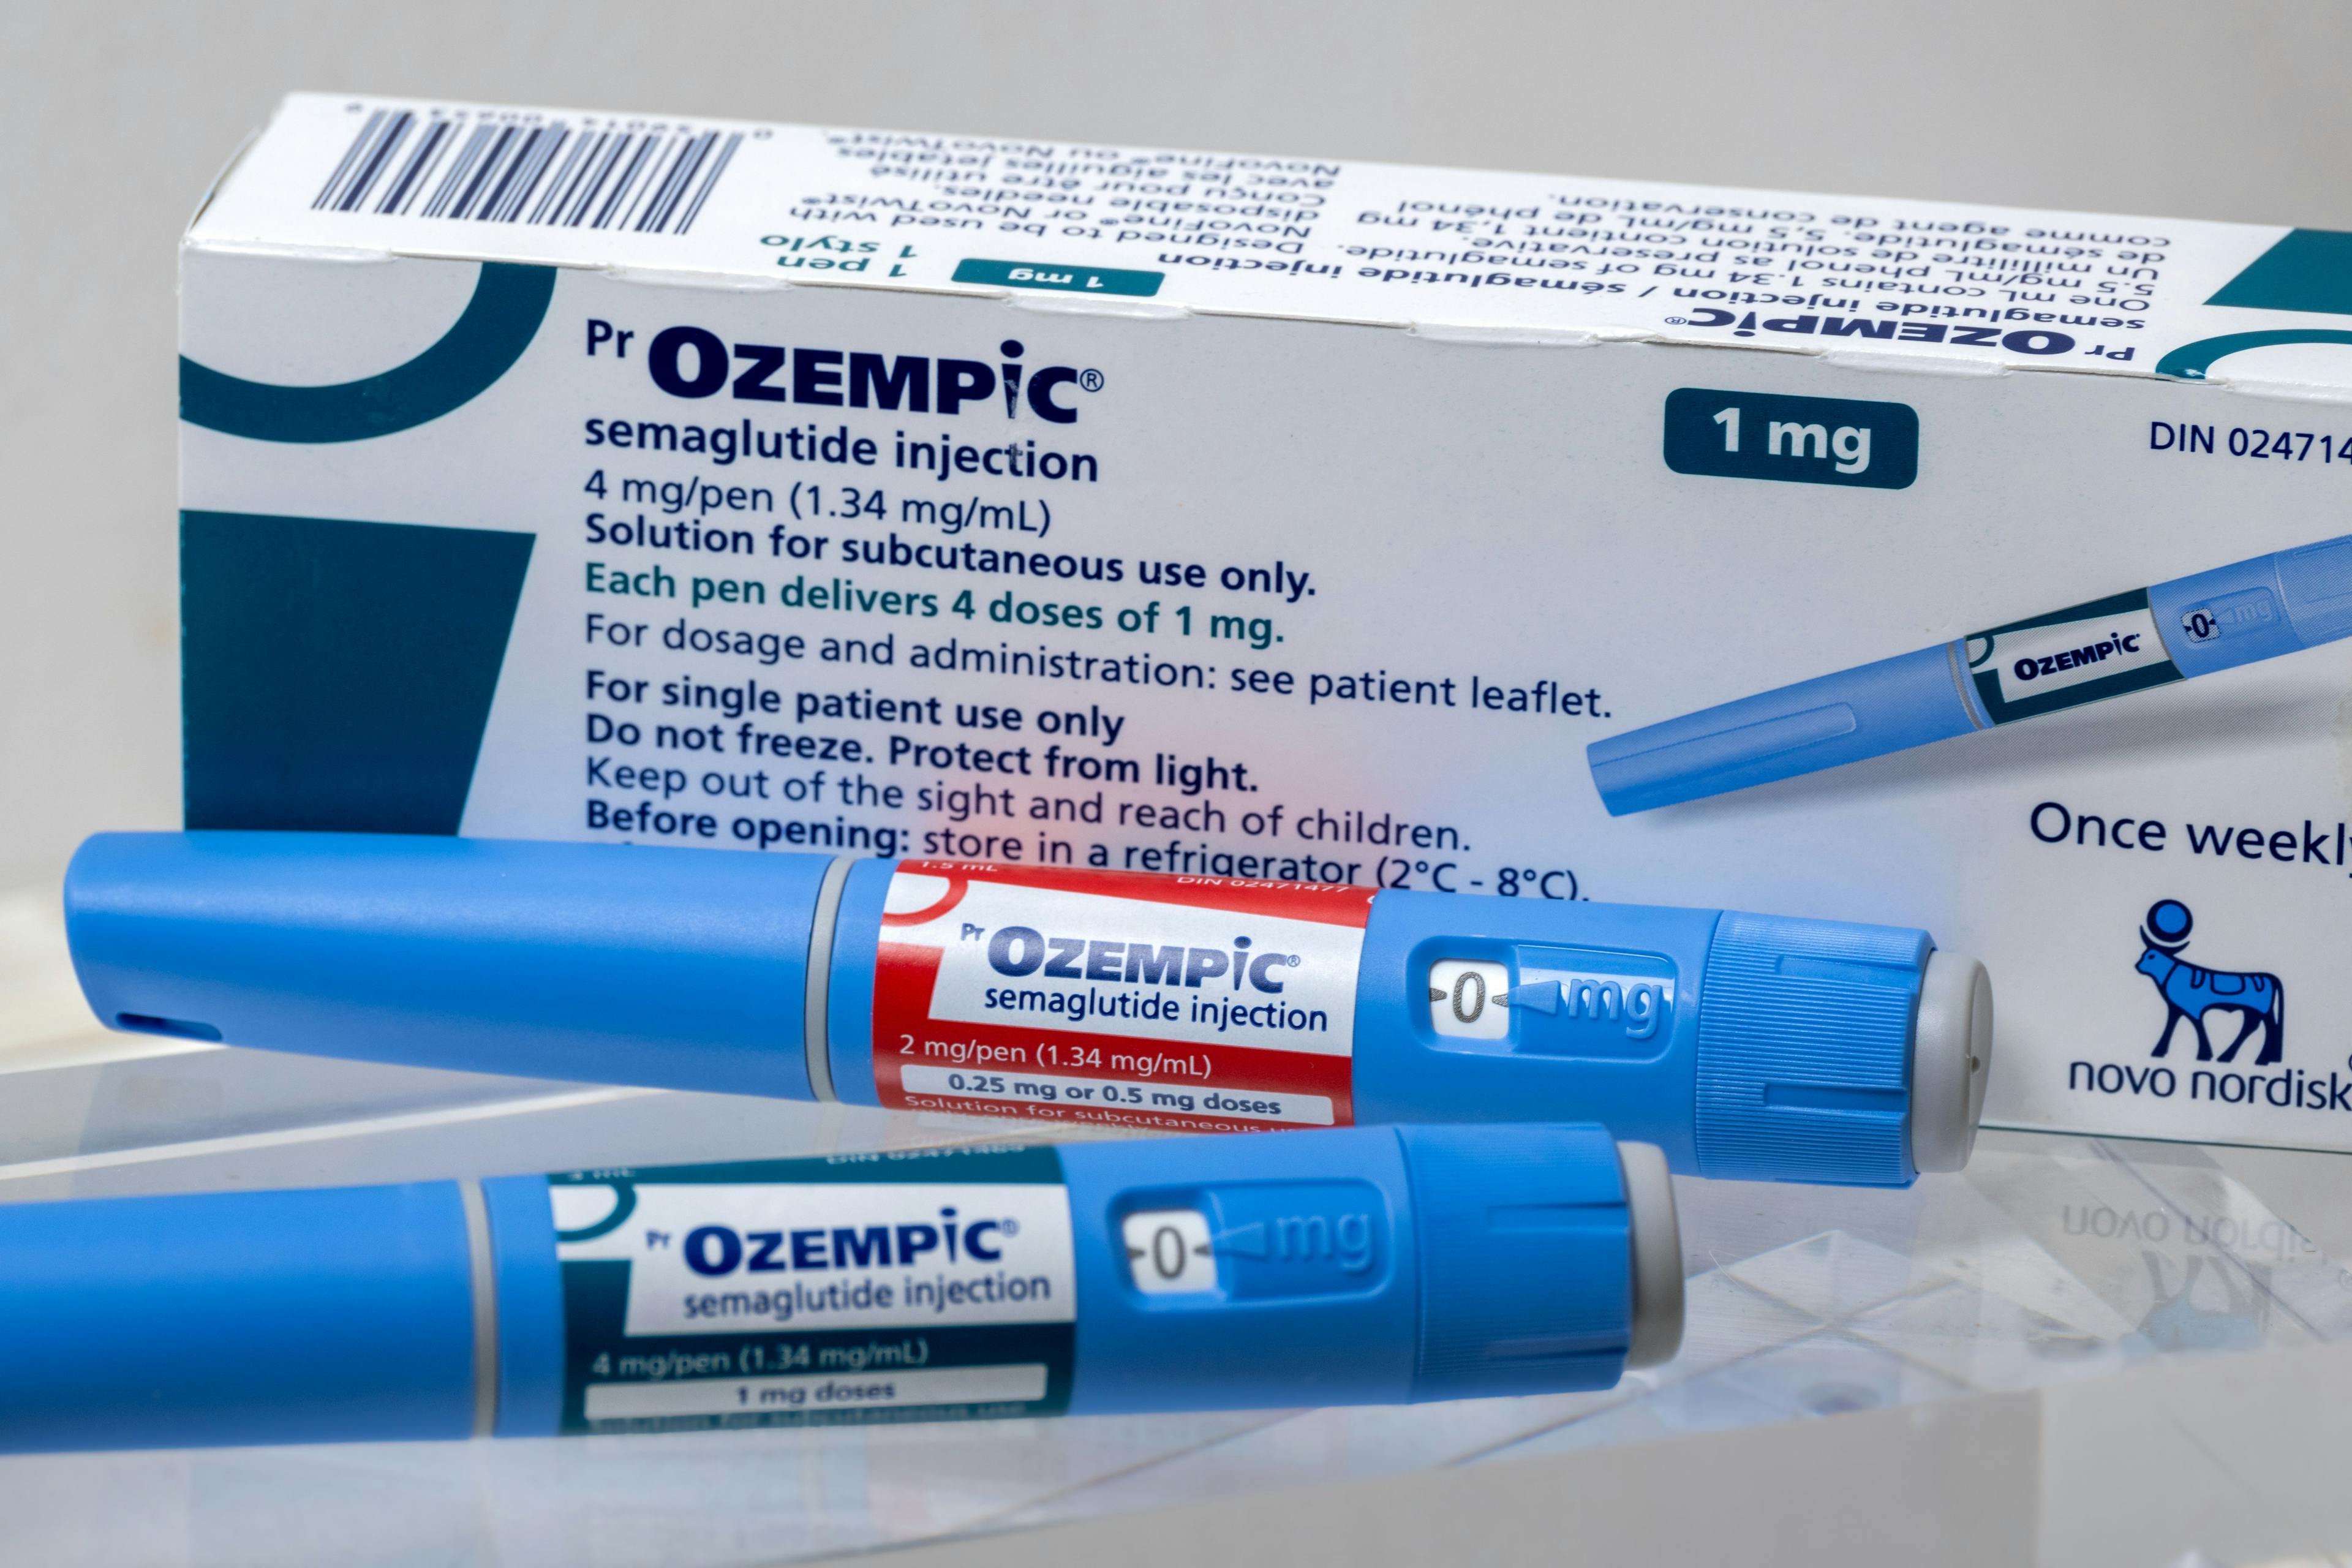 Ozempic semaglutide injection -- Image credit: mbruxelle | stock.adobe.com